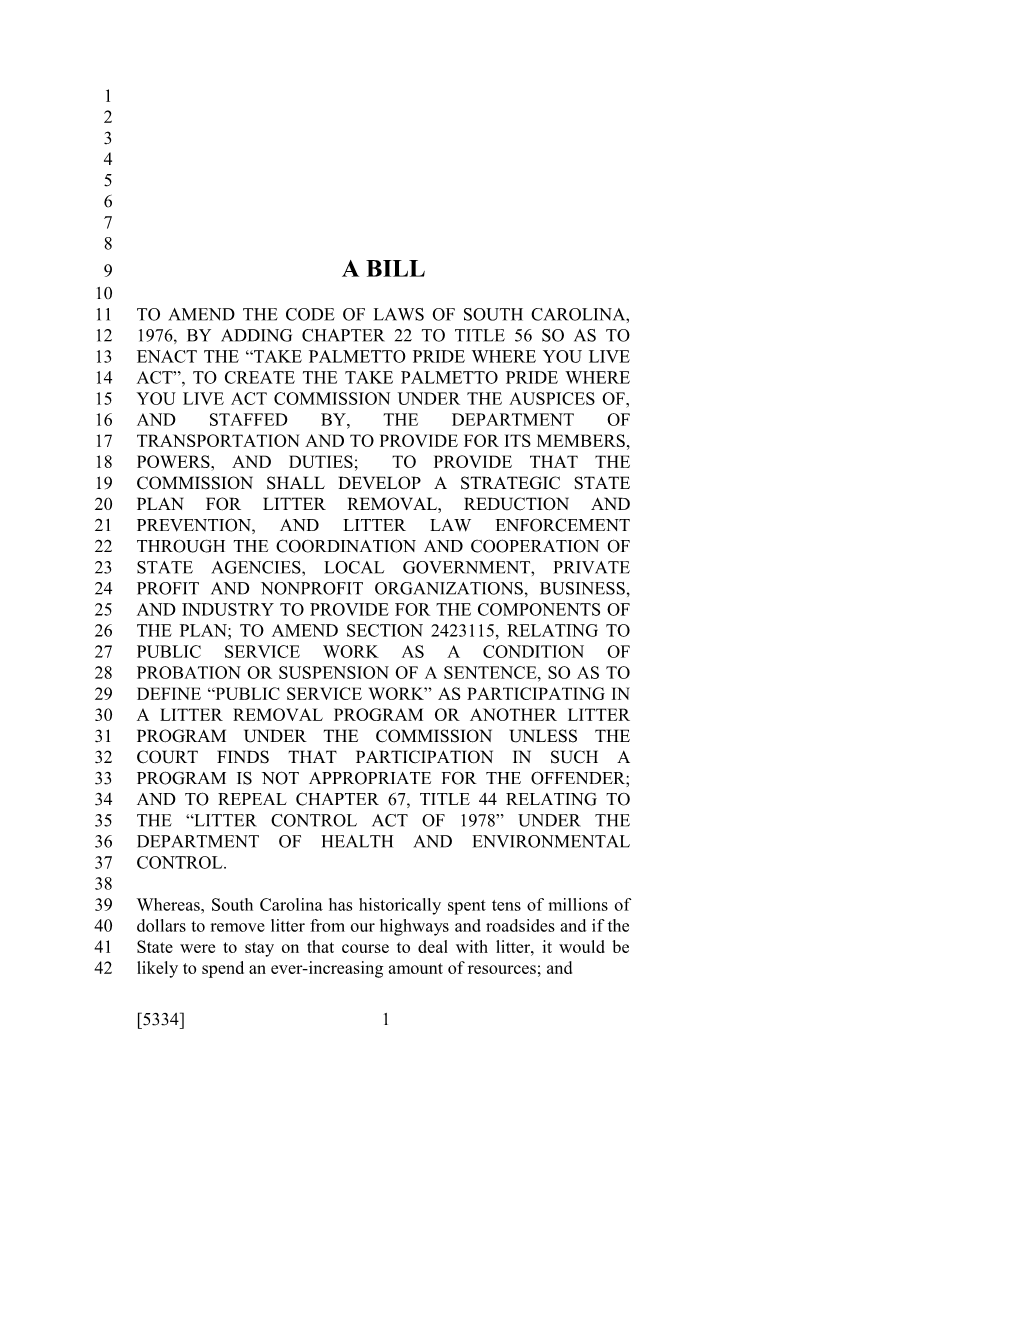 To Amend the Code of Laws of South Carolina, 1976, by Adding Chapter 22 to Title 56 So